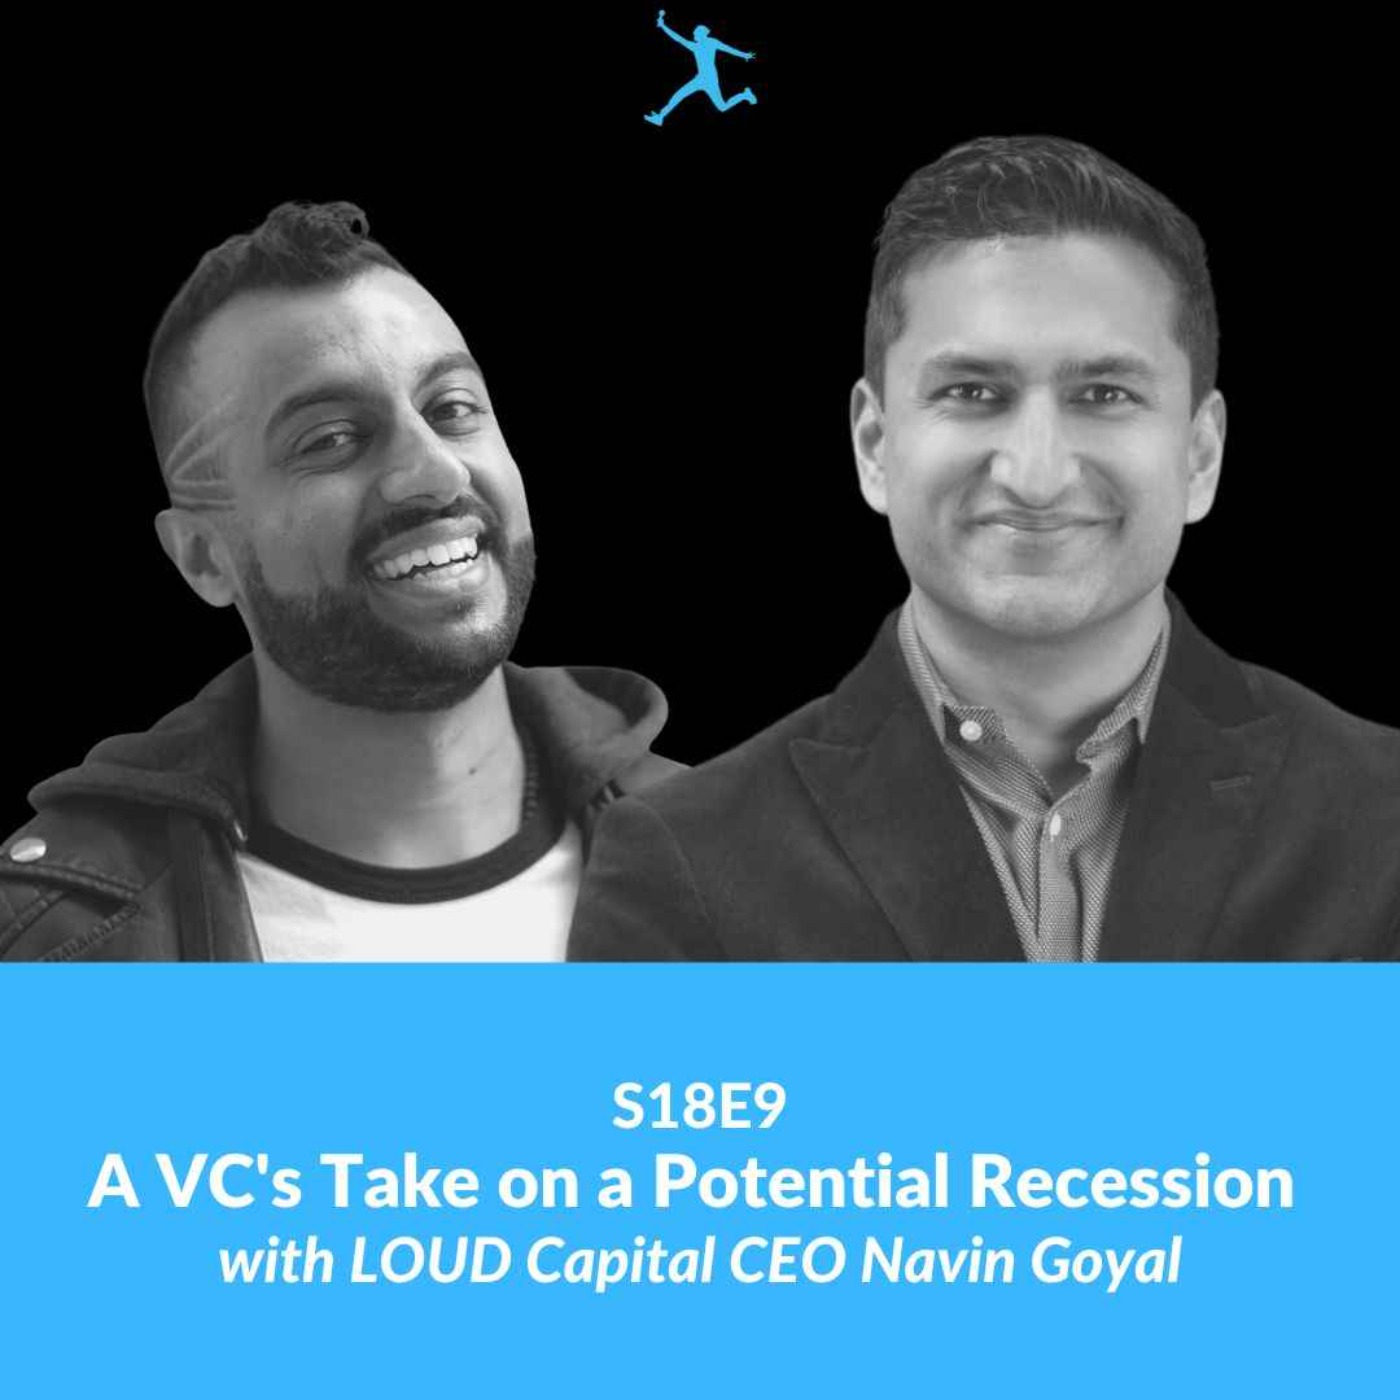 S18E9: A VC's Take on a Potential Recession with LOUD Capital CEO Navin Goyal